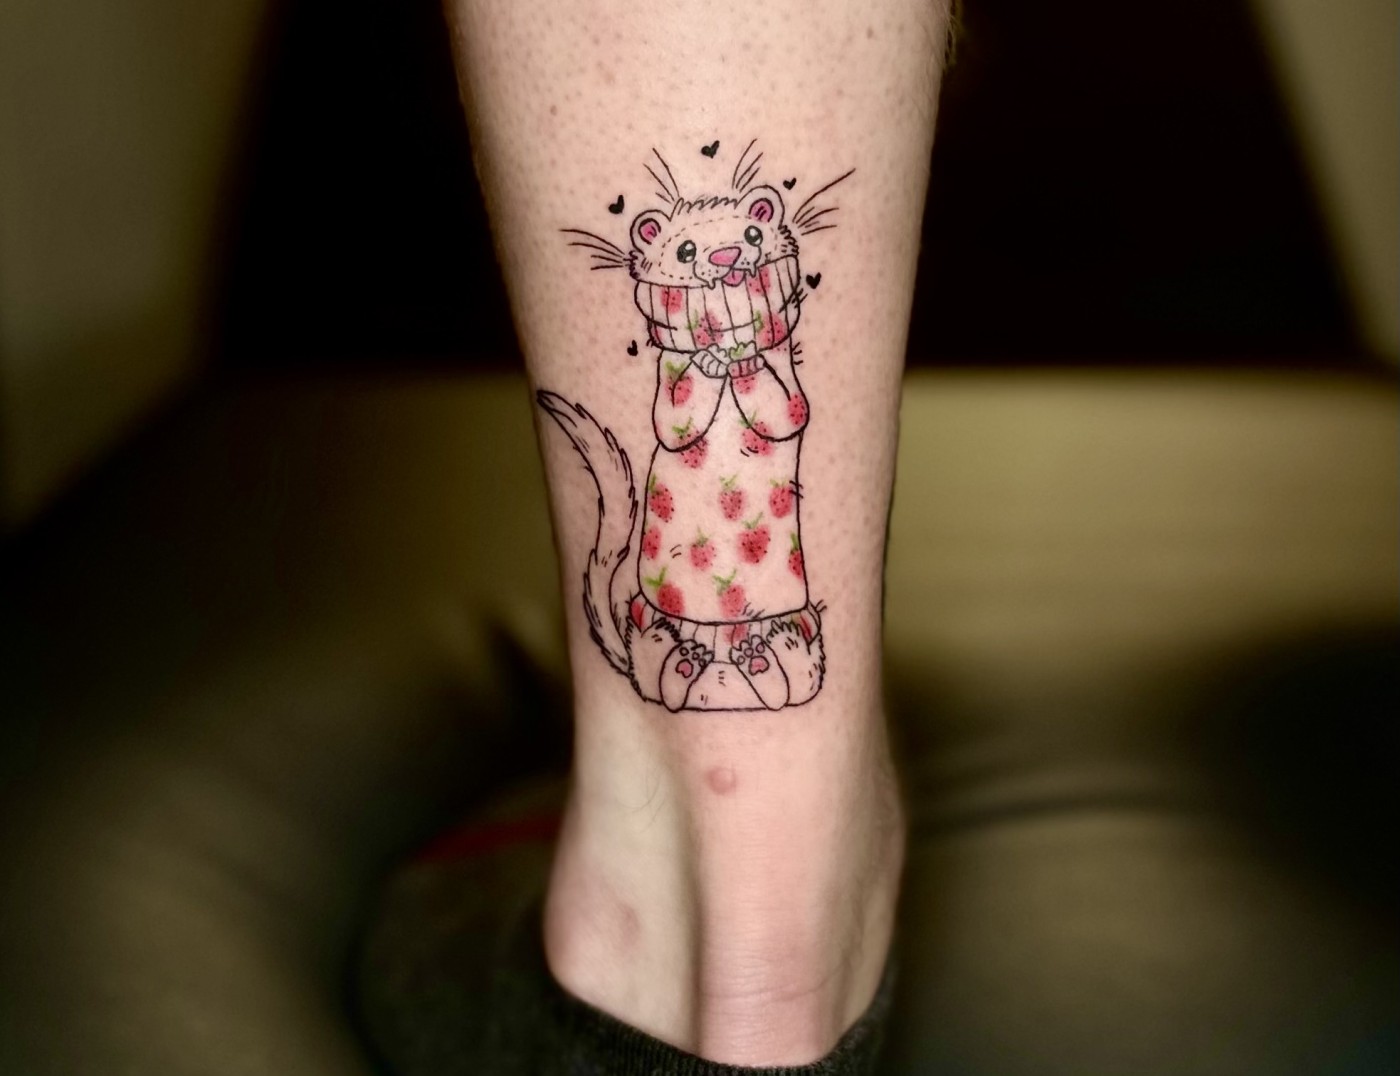 Ferret in a Strawberry Sweatshirt Animal Tattoo By Morana, a guest tattoo artist at Iron Palm Tattoos in Atlanta, Georgia. Morana comes to us from Iron & Ink Tattoo Studio in Los Angeles, California. We're open late night until 2AM most nights. Call 404-973-7828 or stop by for a free consultation.